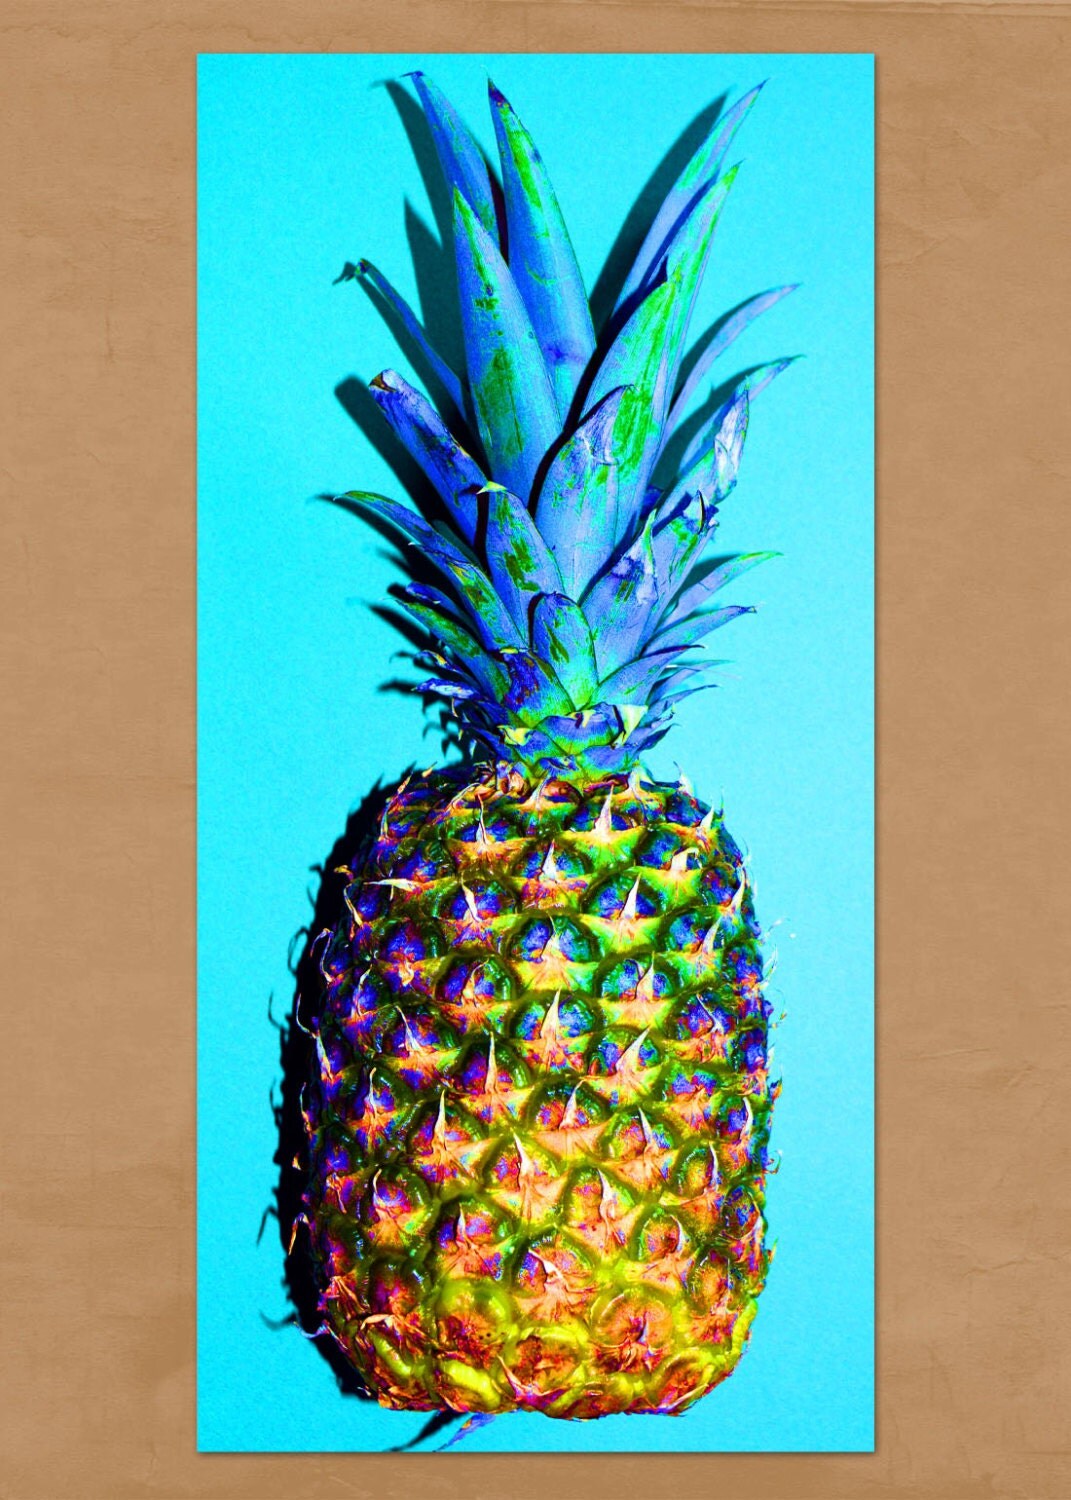 Colorful pineapple on blue background photo greeting card